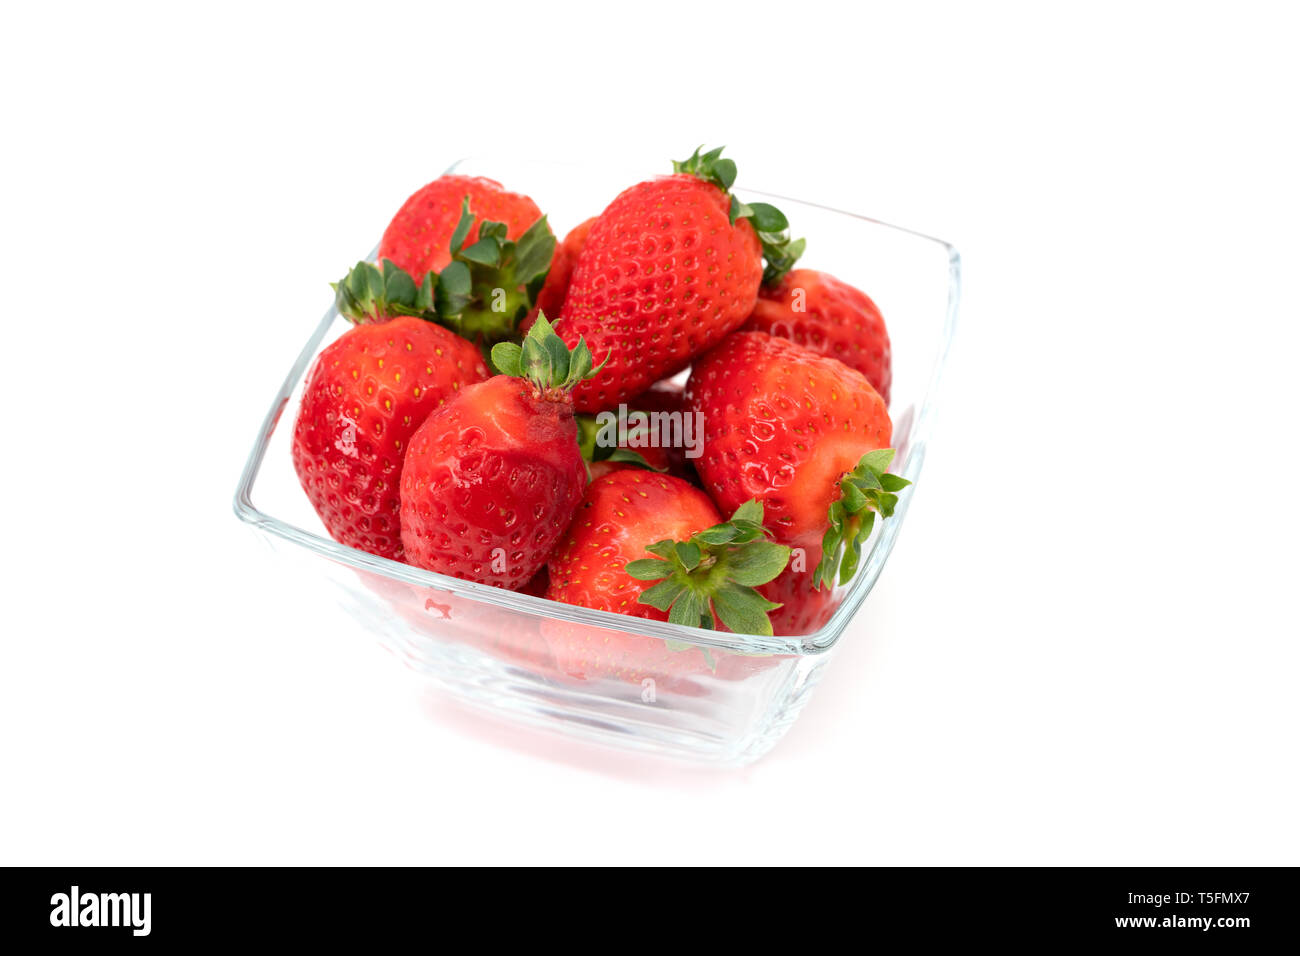 Glass bowl filled with over ripe strawberries Stock Photo